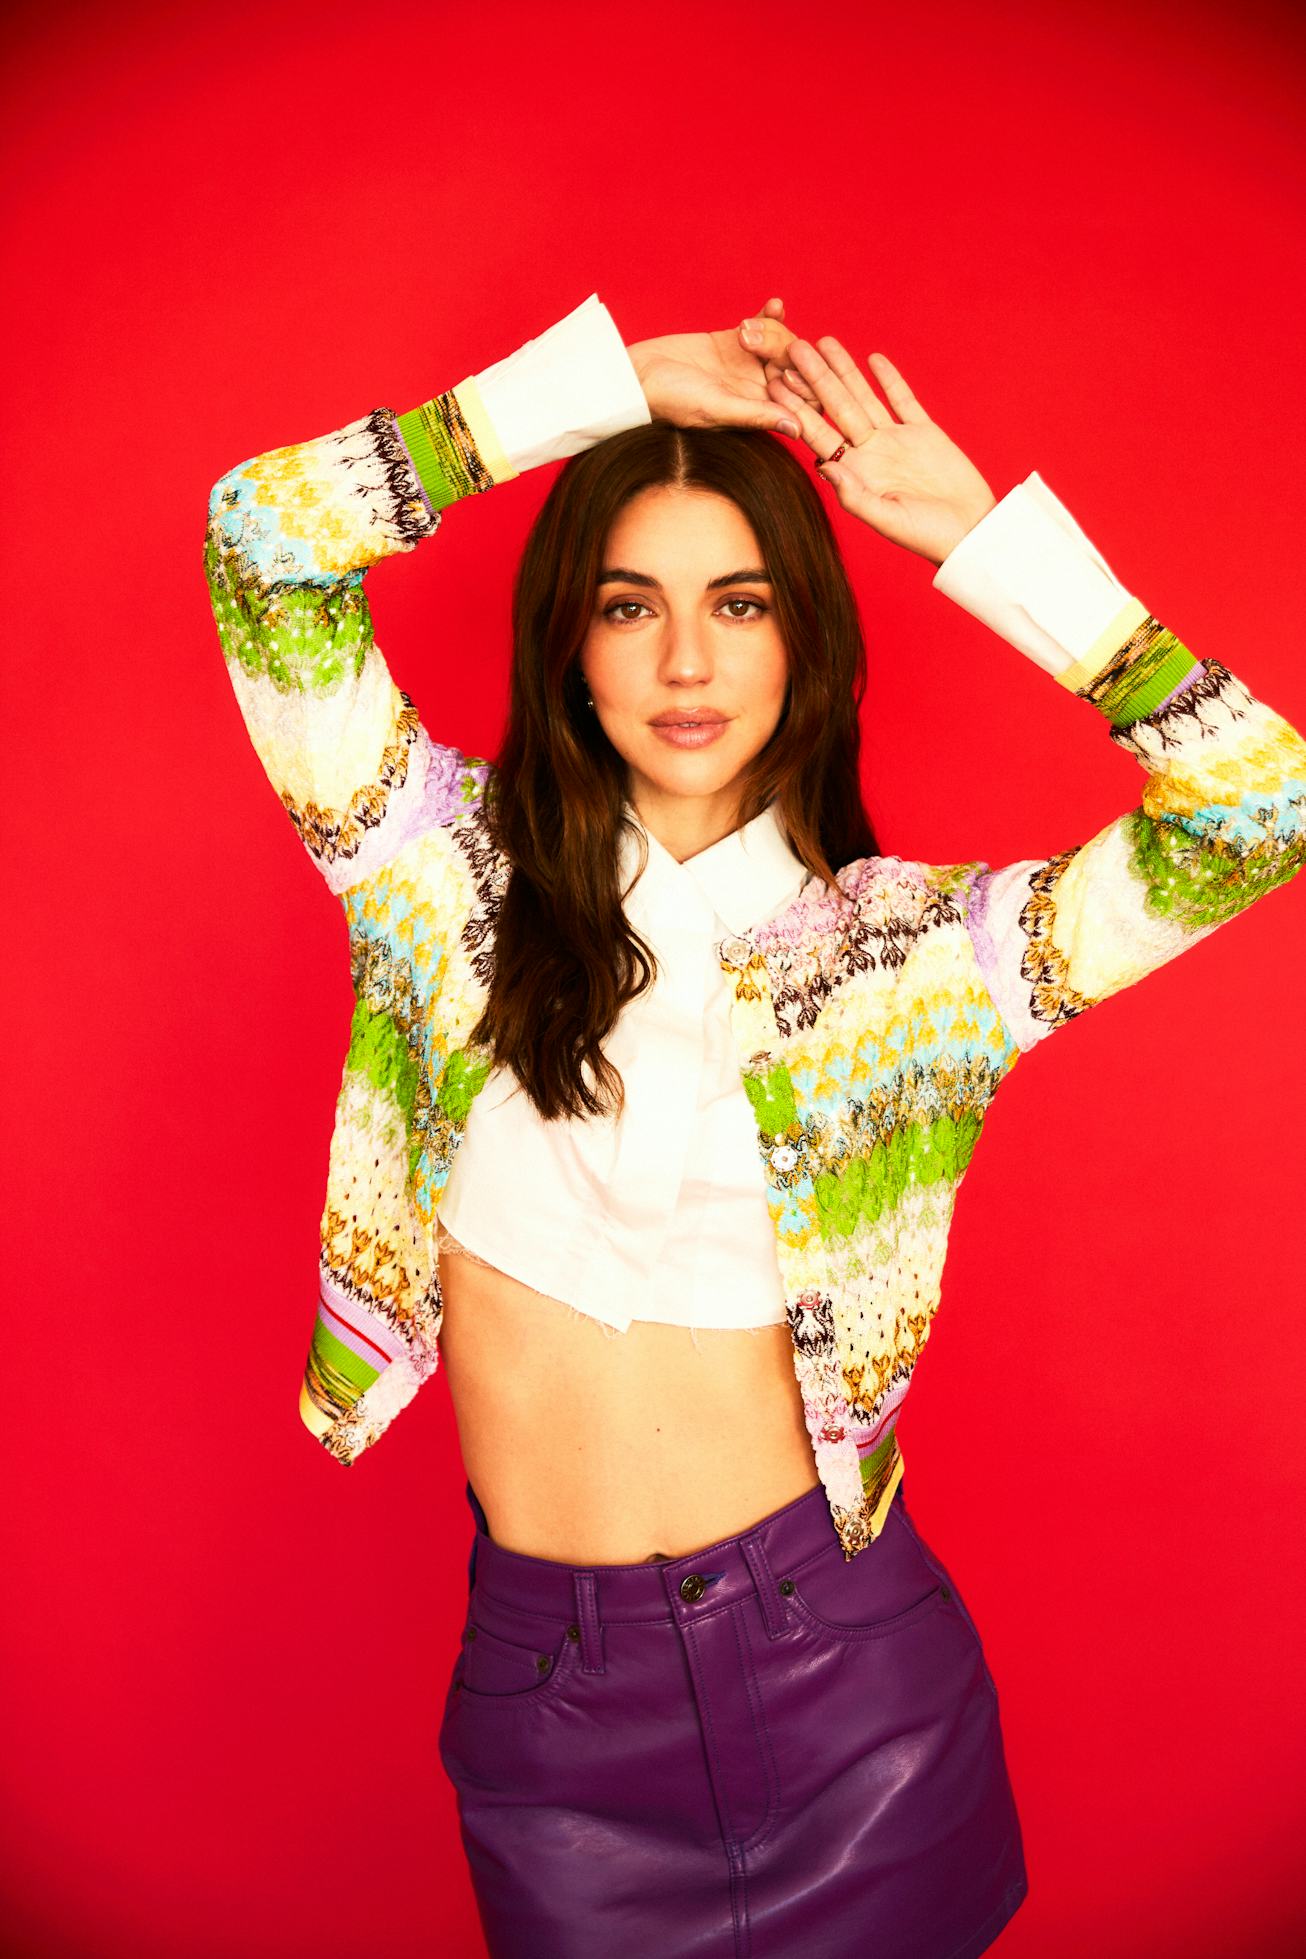 'Grey’s Anatomy' Star Adelaide Kane Sheds Light on the Nitty, Gritty Details of Celebrity